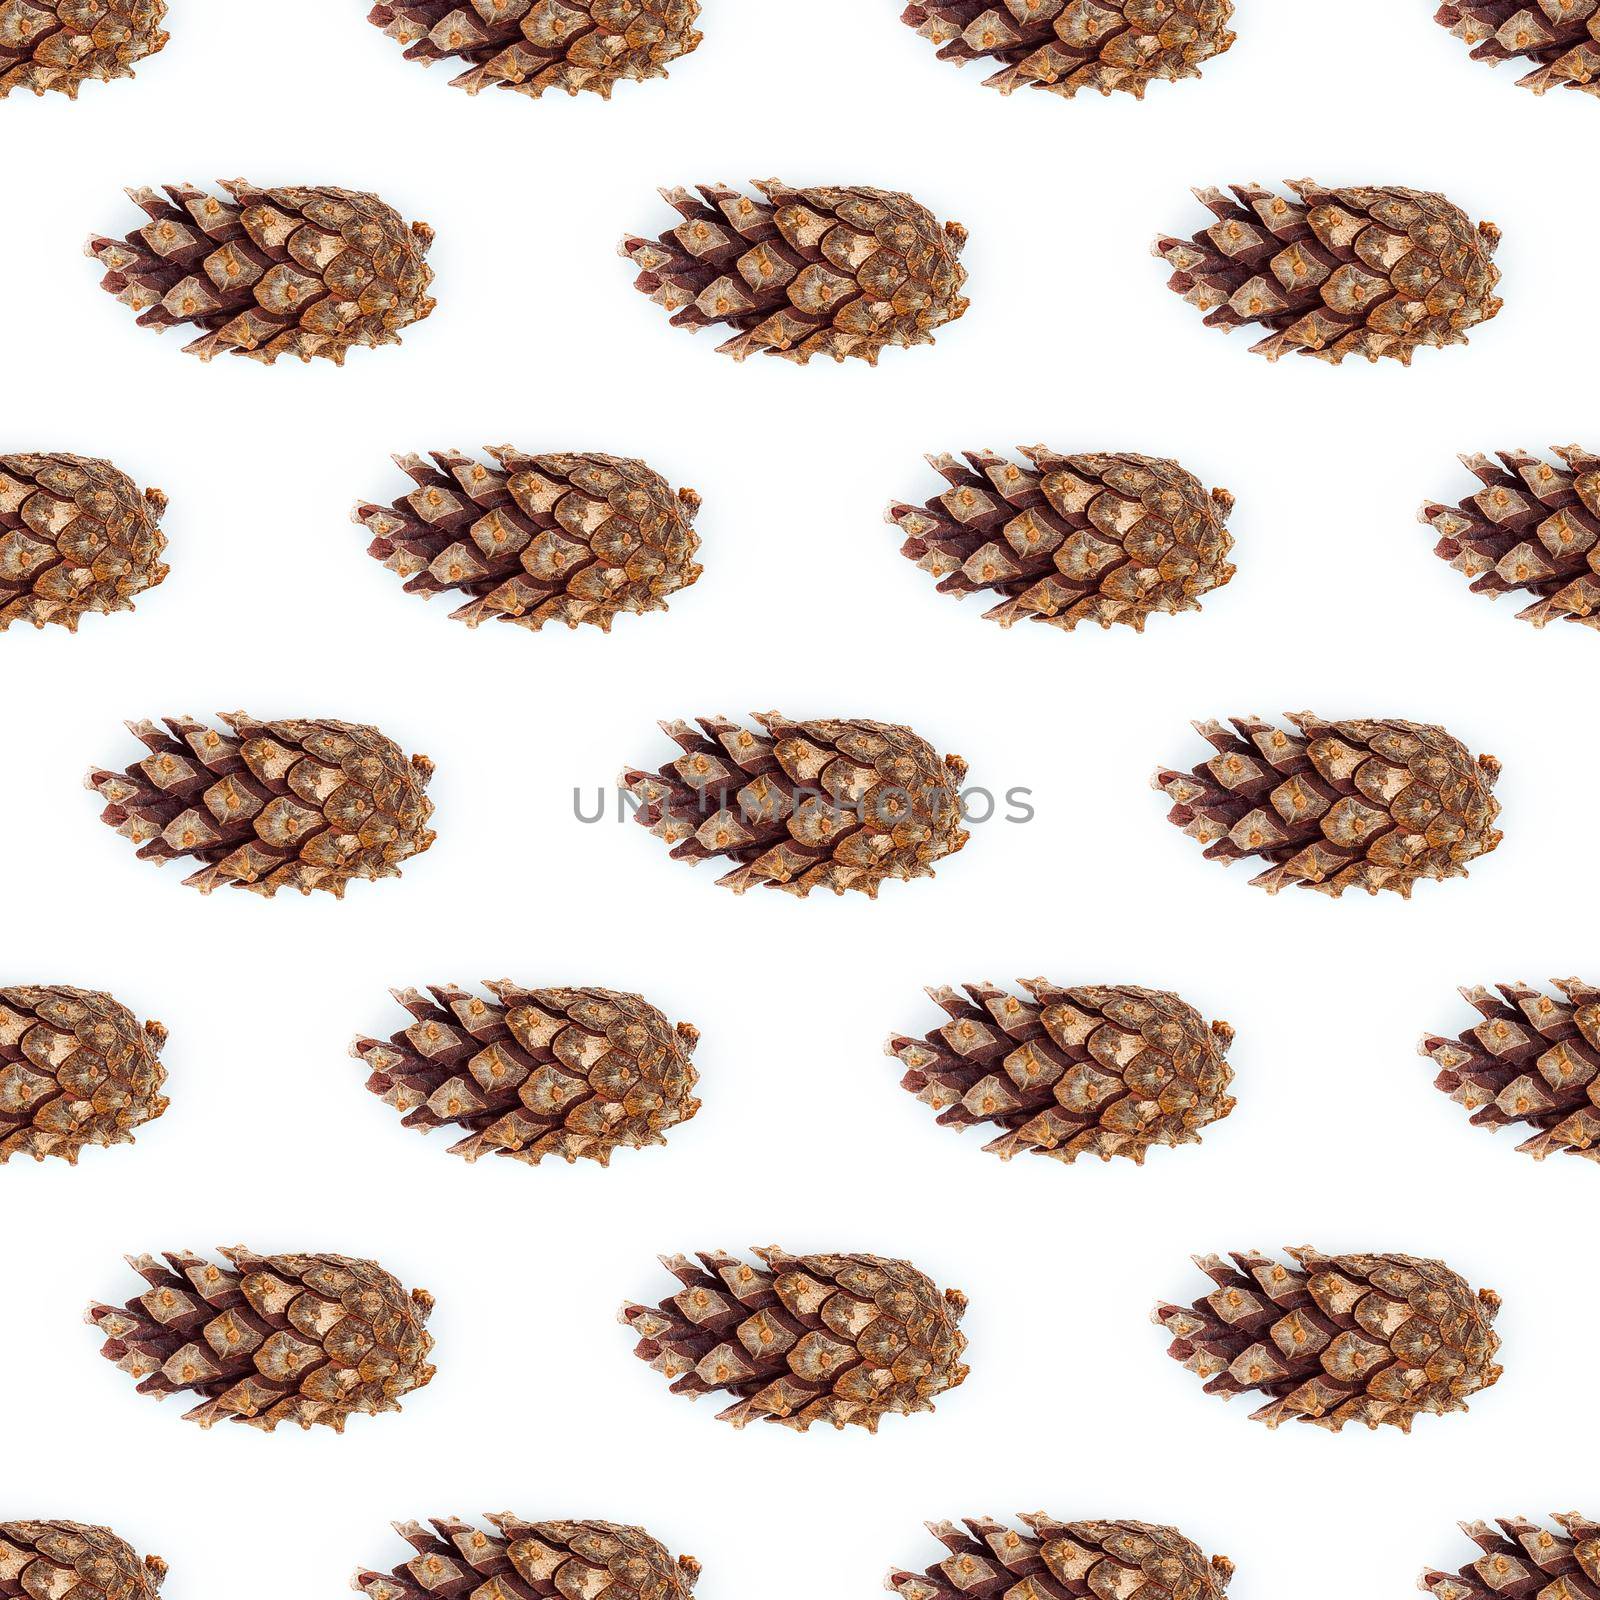 Fir tree cone on a white background abstract seamless pattern. Christmas, decoration, holiday, party, winter, xmas, celebration, conifer, decorative, merry, new by lunarts